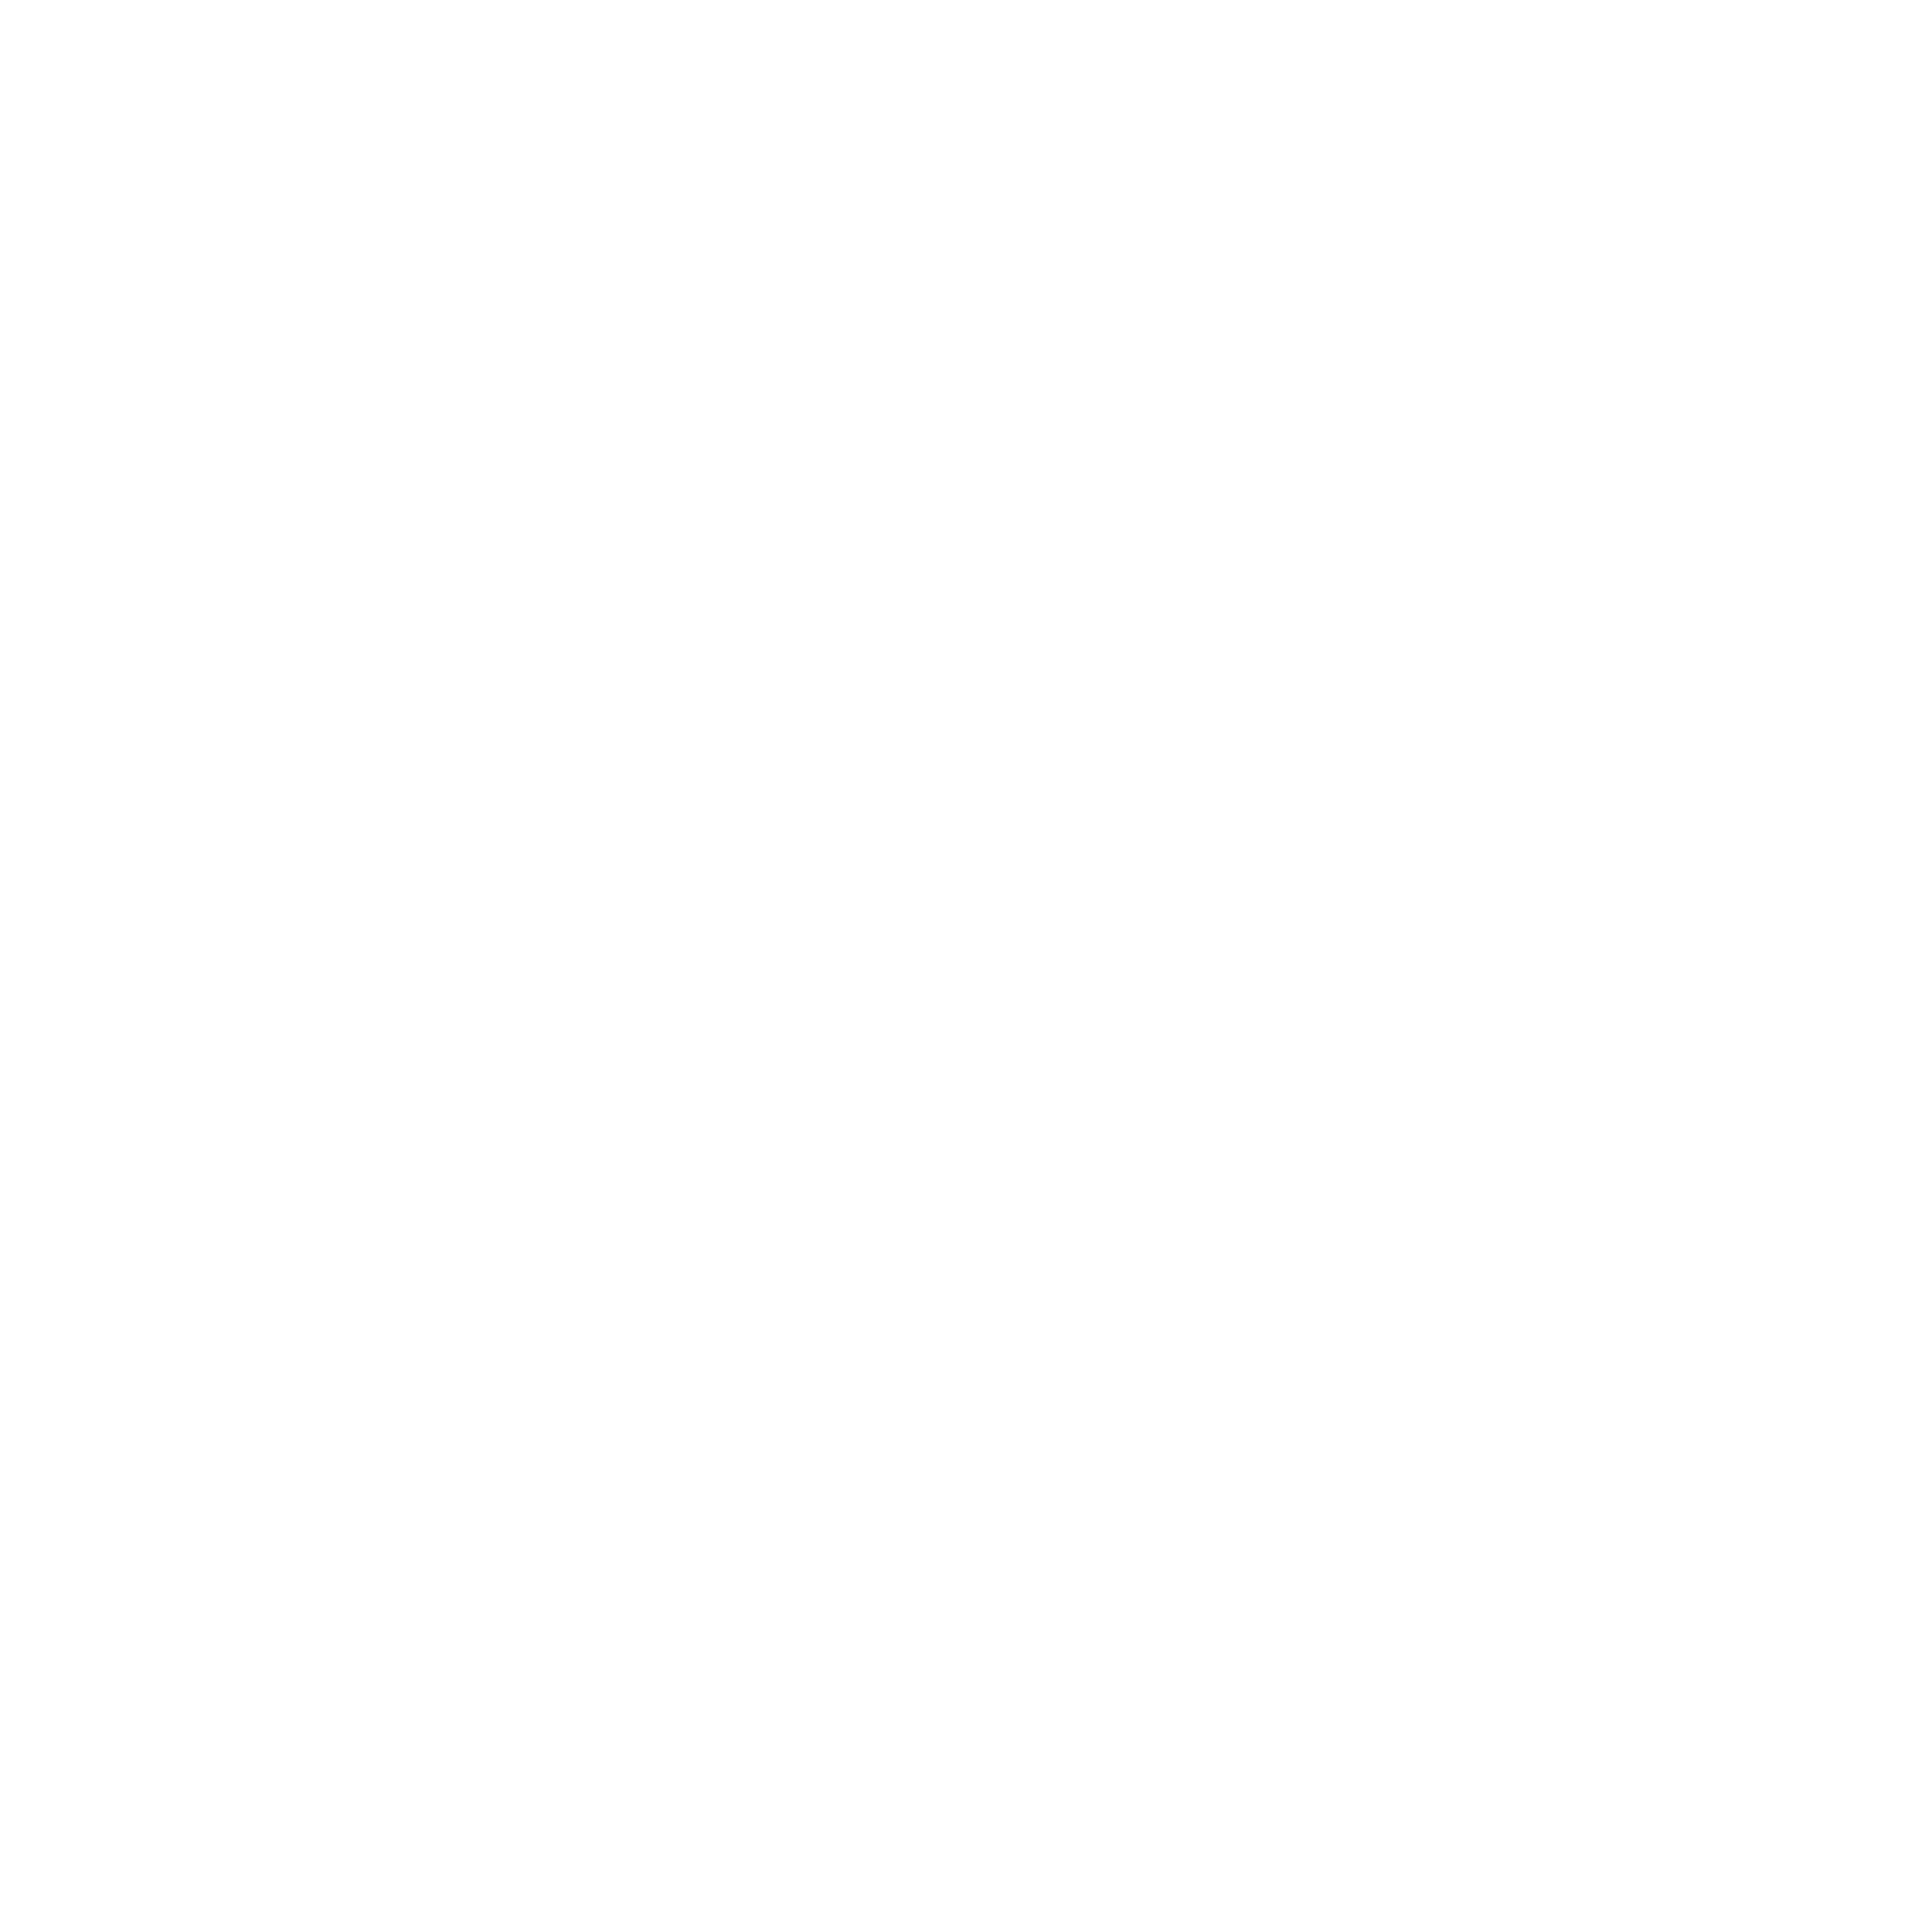 TokenPay Cryptocurrency icon